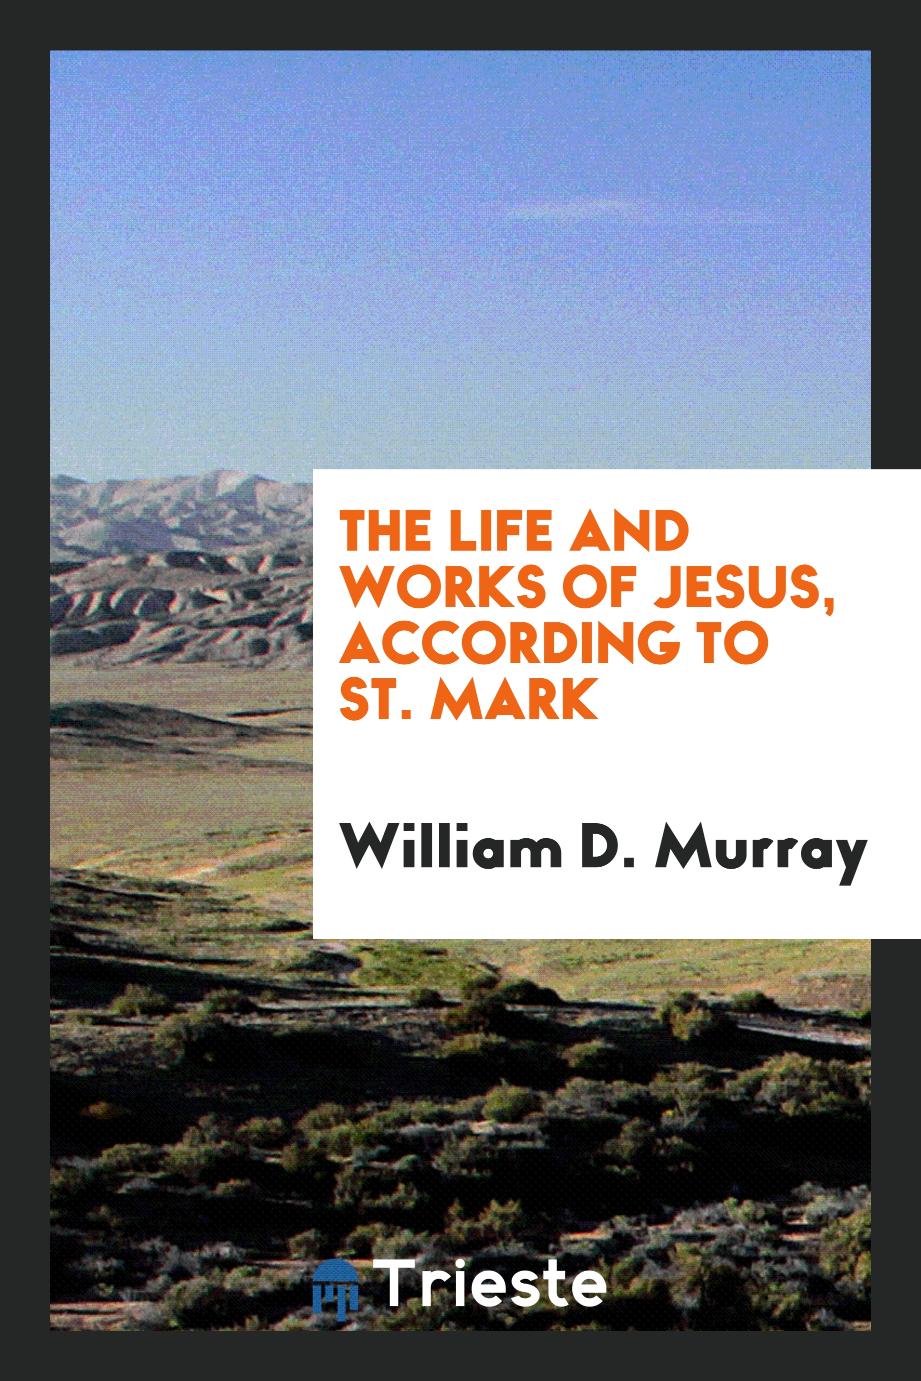 The life and works of Jesus, according to St. Mark